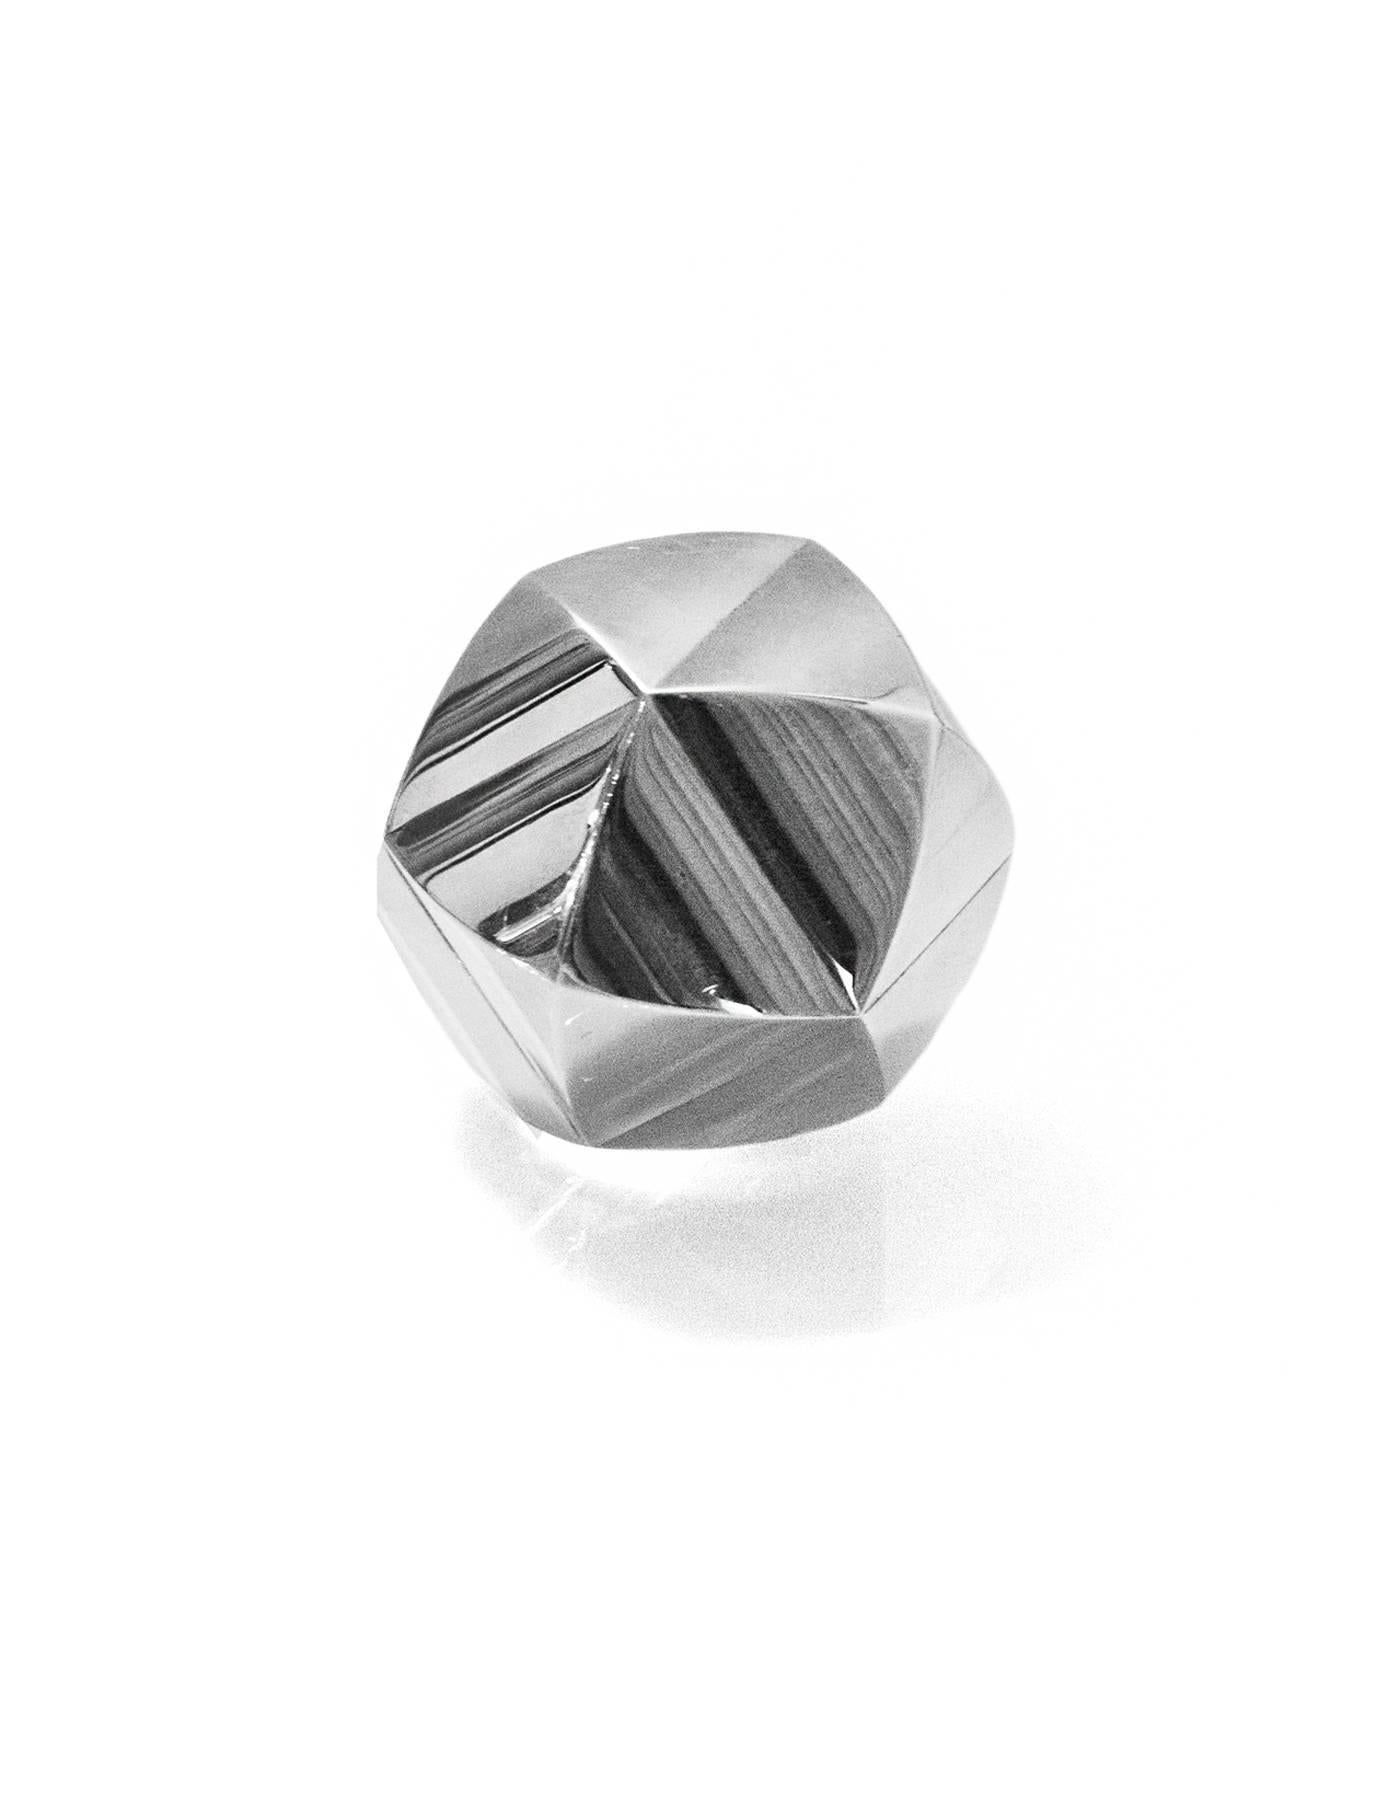 Hermes Sterling Silver XL Geometric Cocktail Ring sz 6.5 1